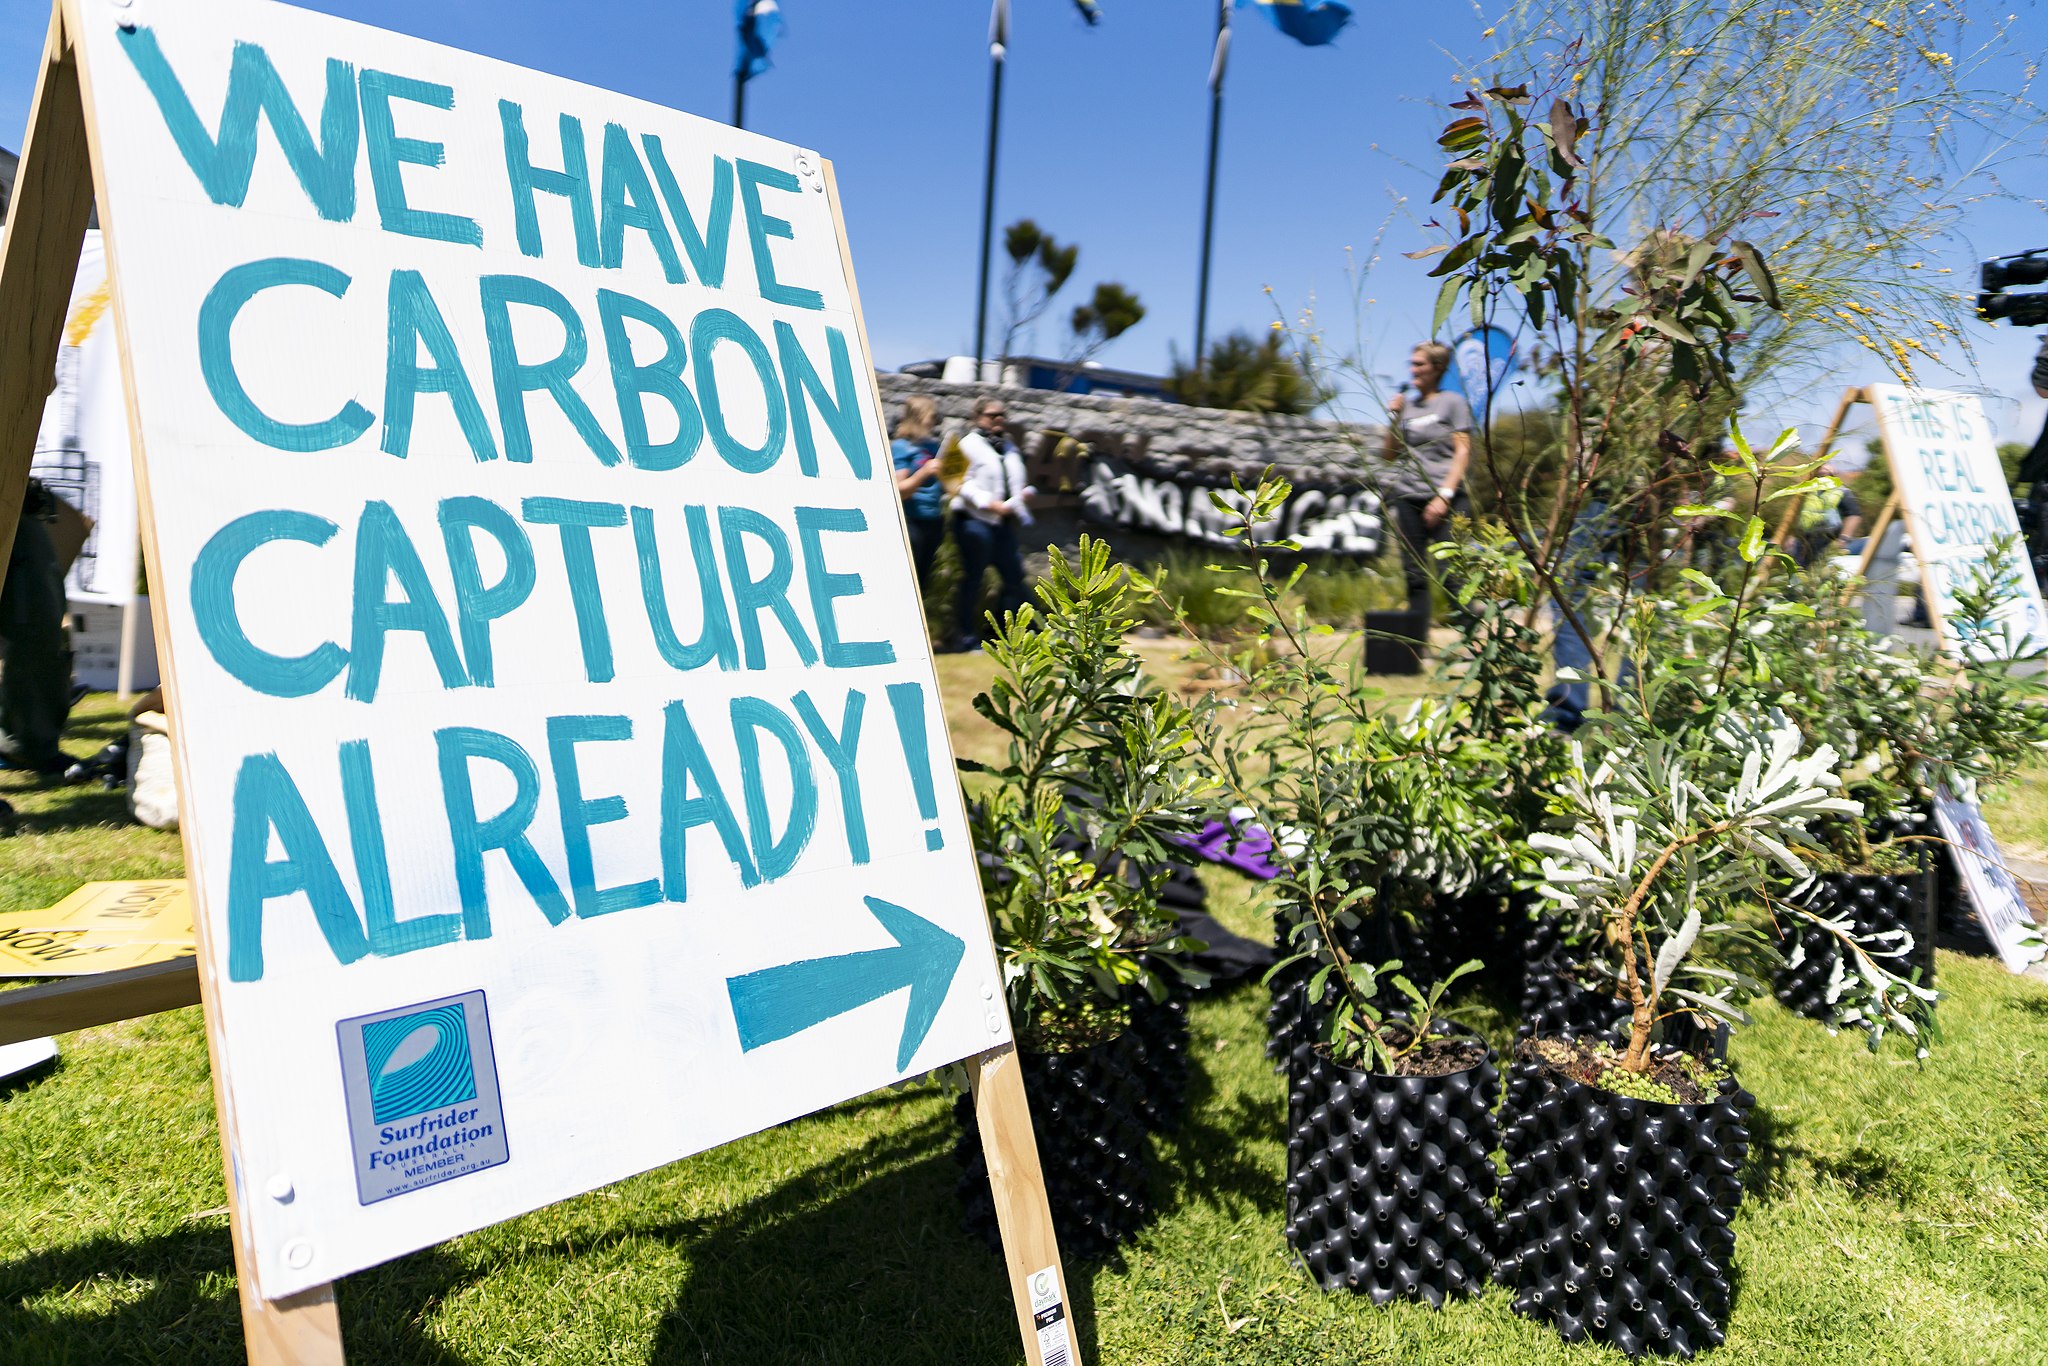 Photograph of climate protest with sign reading "We have carbon capture already" with an arrow pointing at plants